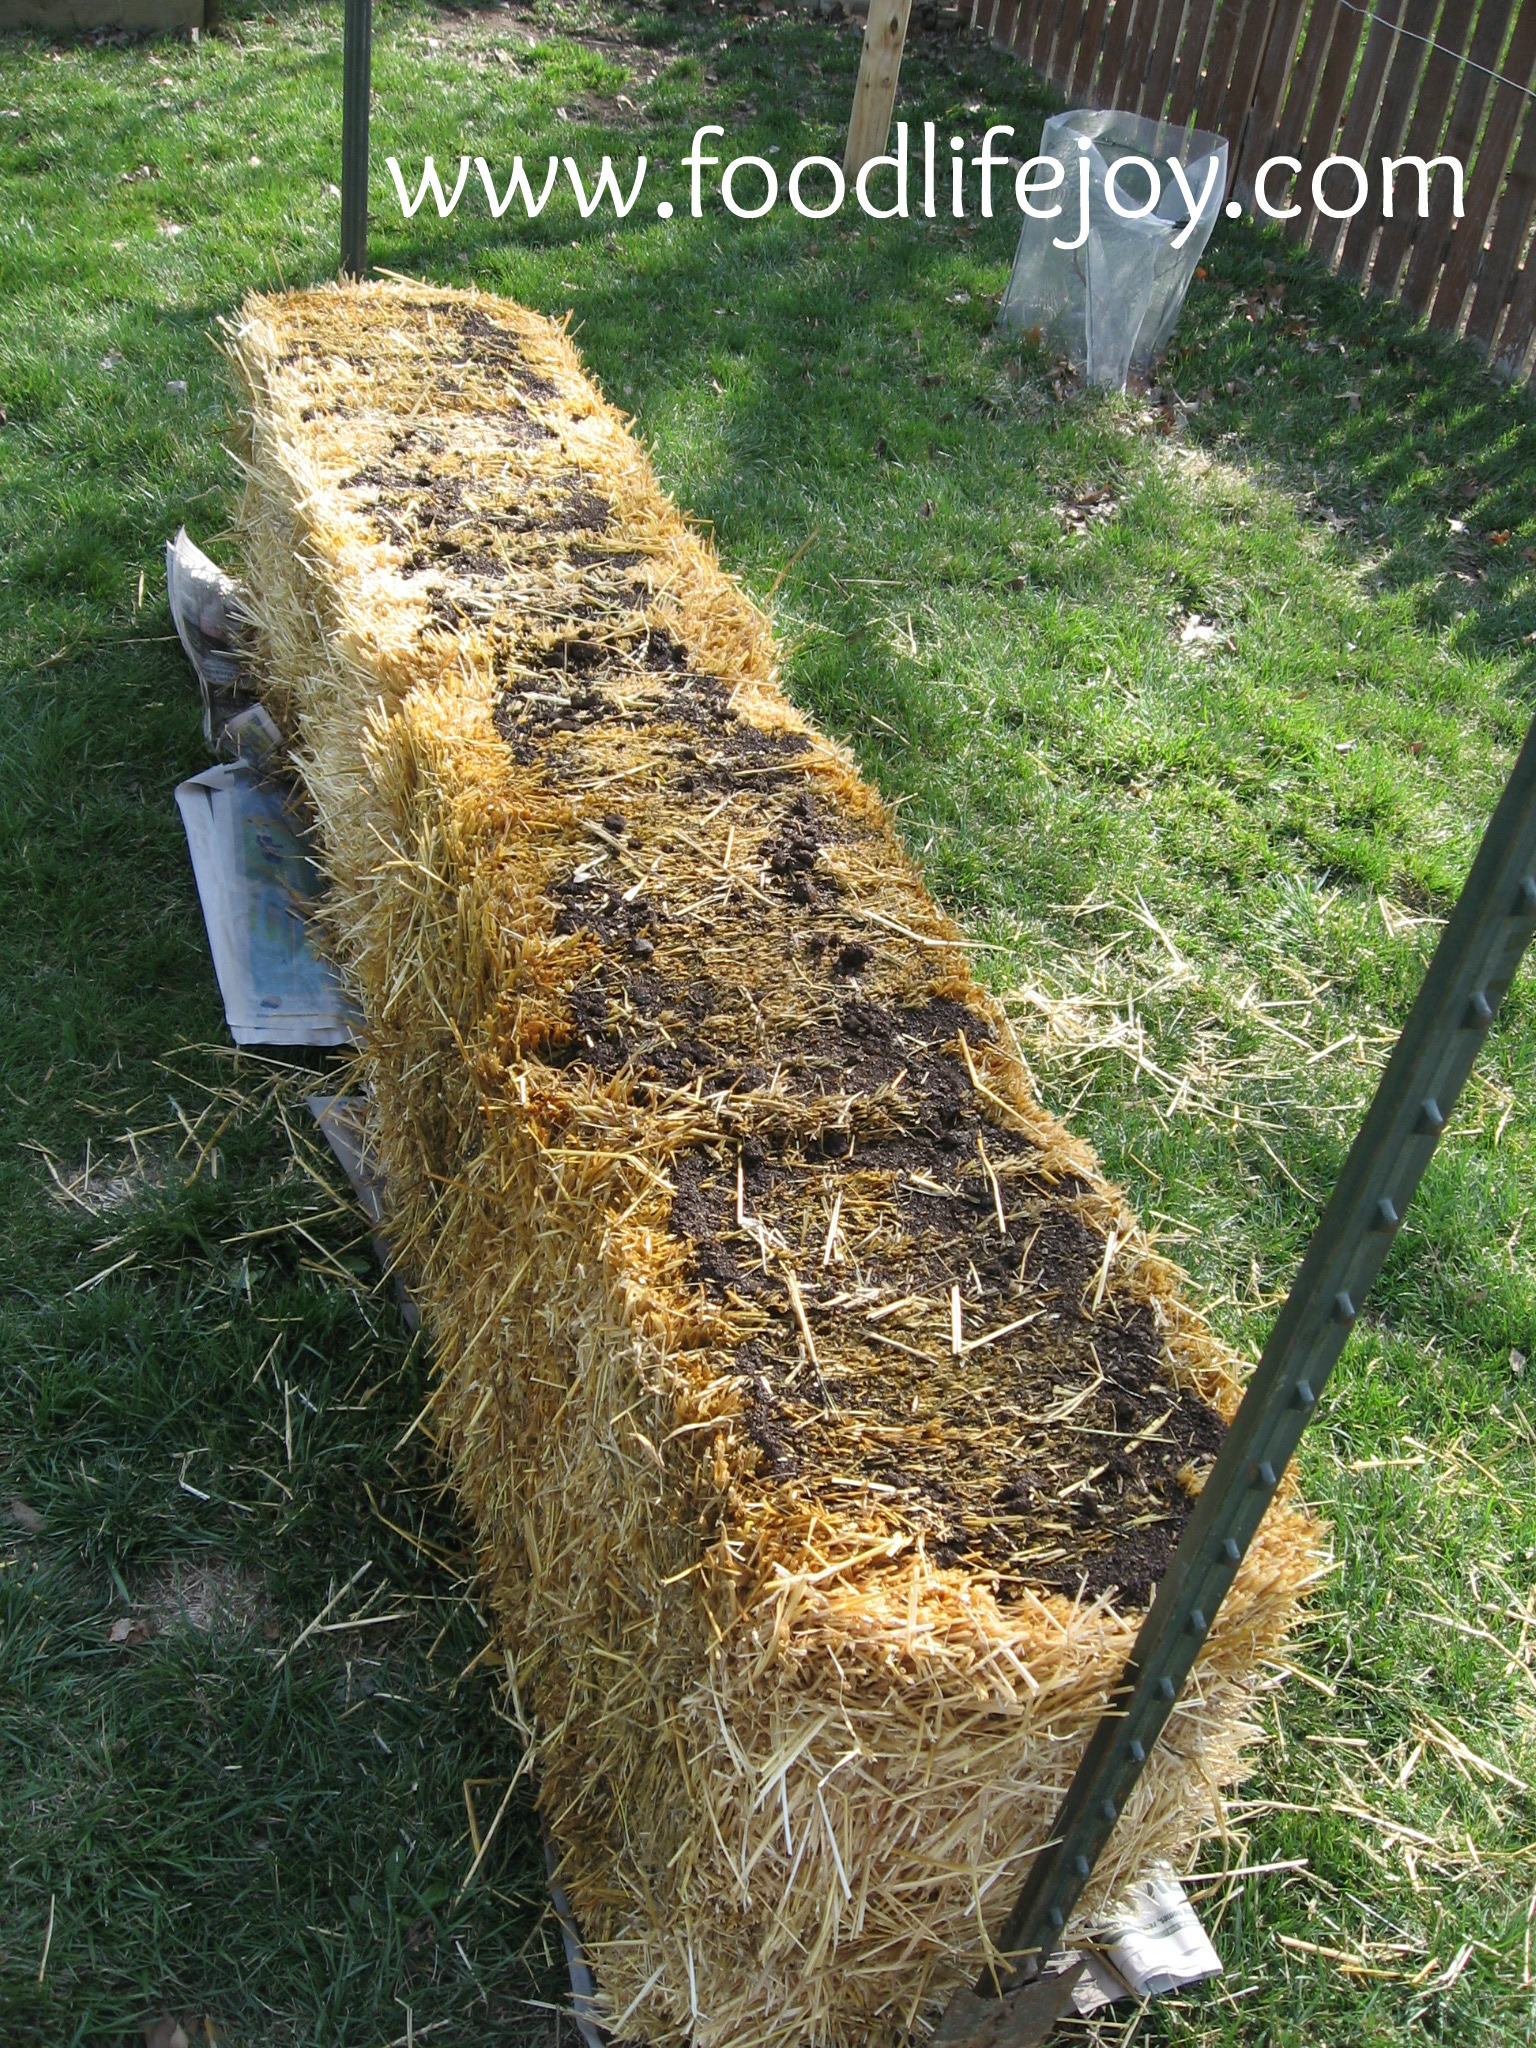 Straw bales an intriguing option for Kansas home gardeners